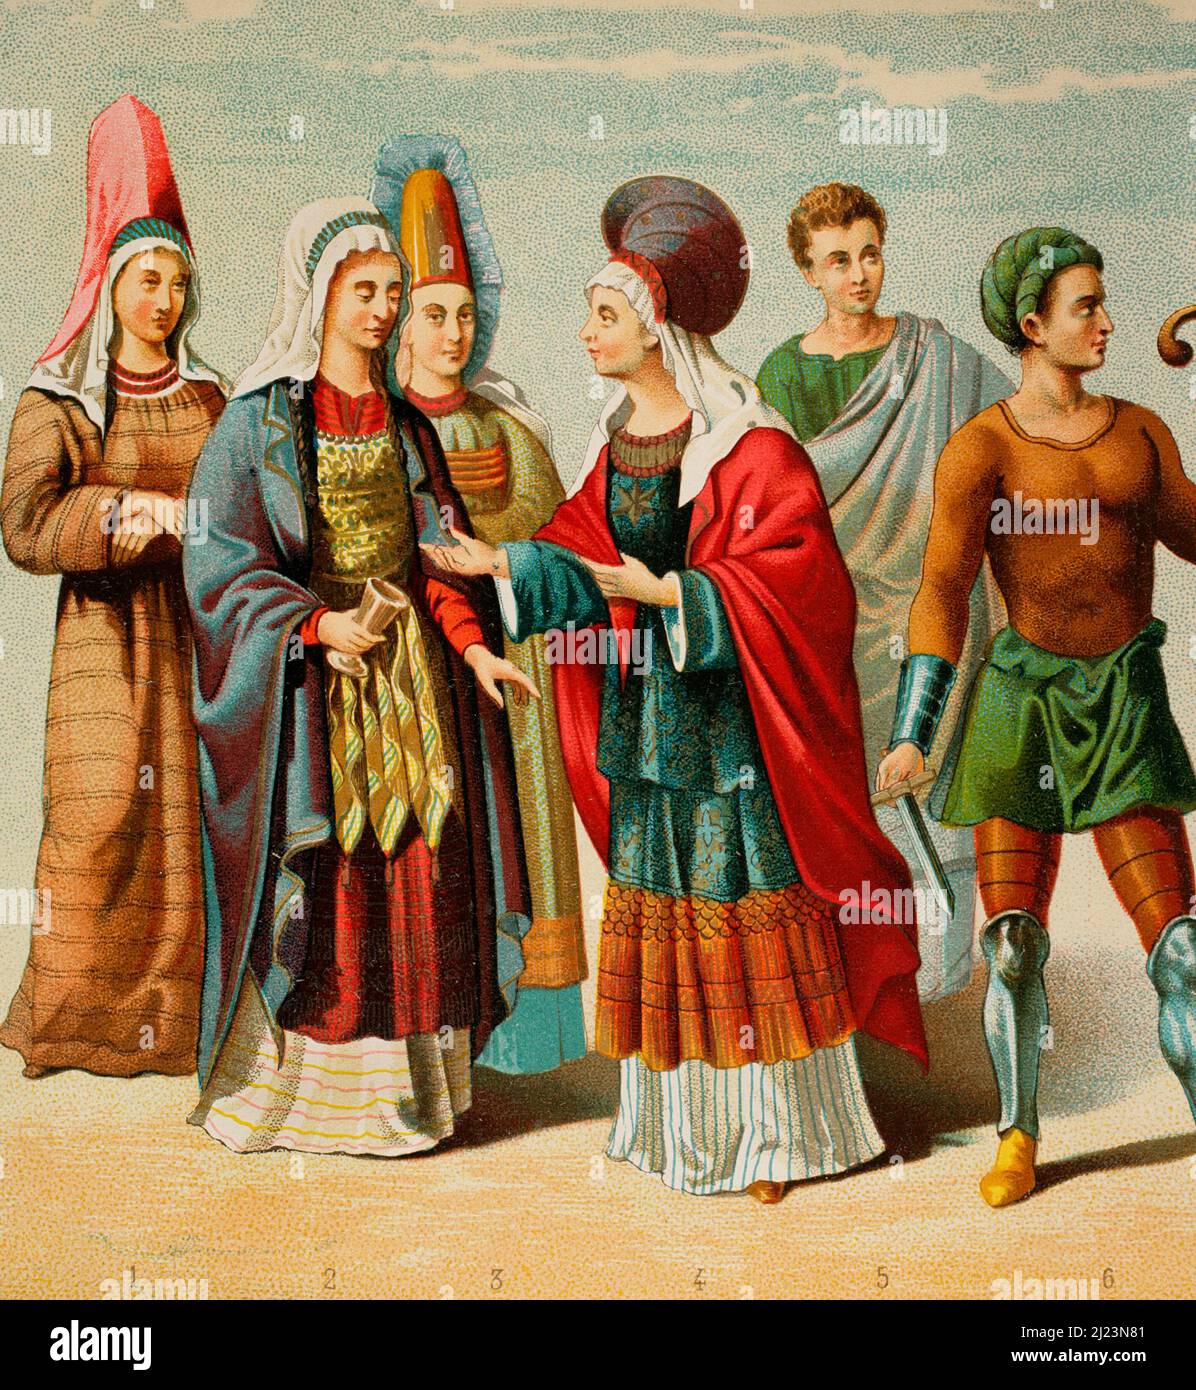 Iberian Peninsula. Ancient History. Phoenicians. Figures 1 to 5: illustrations inspired by antiquities from the Cerro de los Santos. Figure 6: Phoenician from a small lamp in the Museum of Tarragona. Chromolithography. Historia General de España, by Modesto Lafuente. Volume I. Published in Barcelona, 1877. Stock Photo